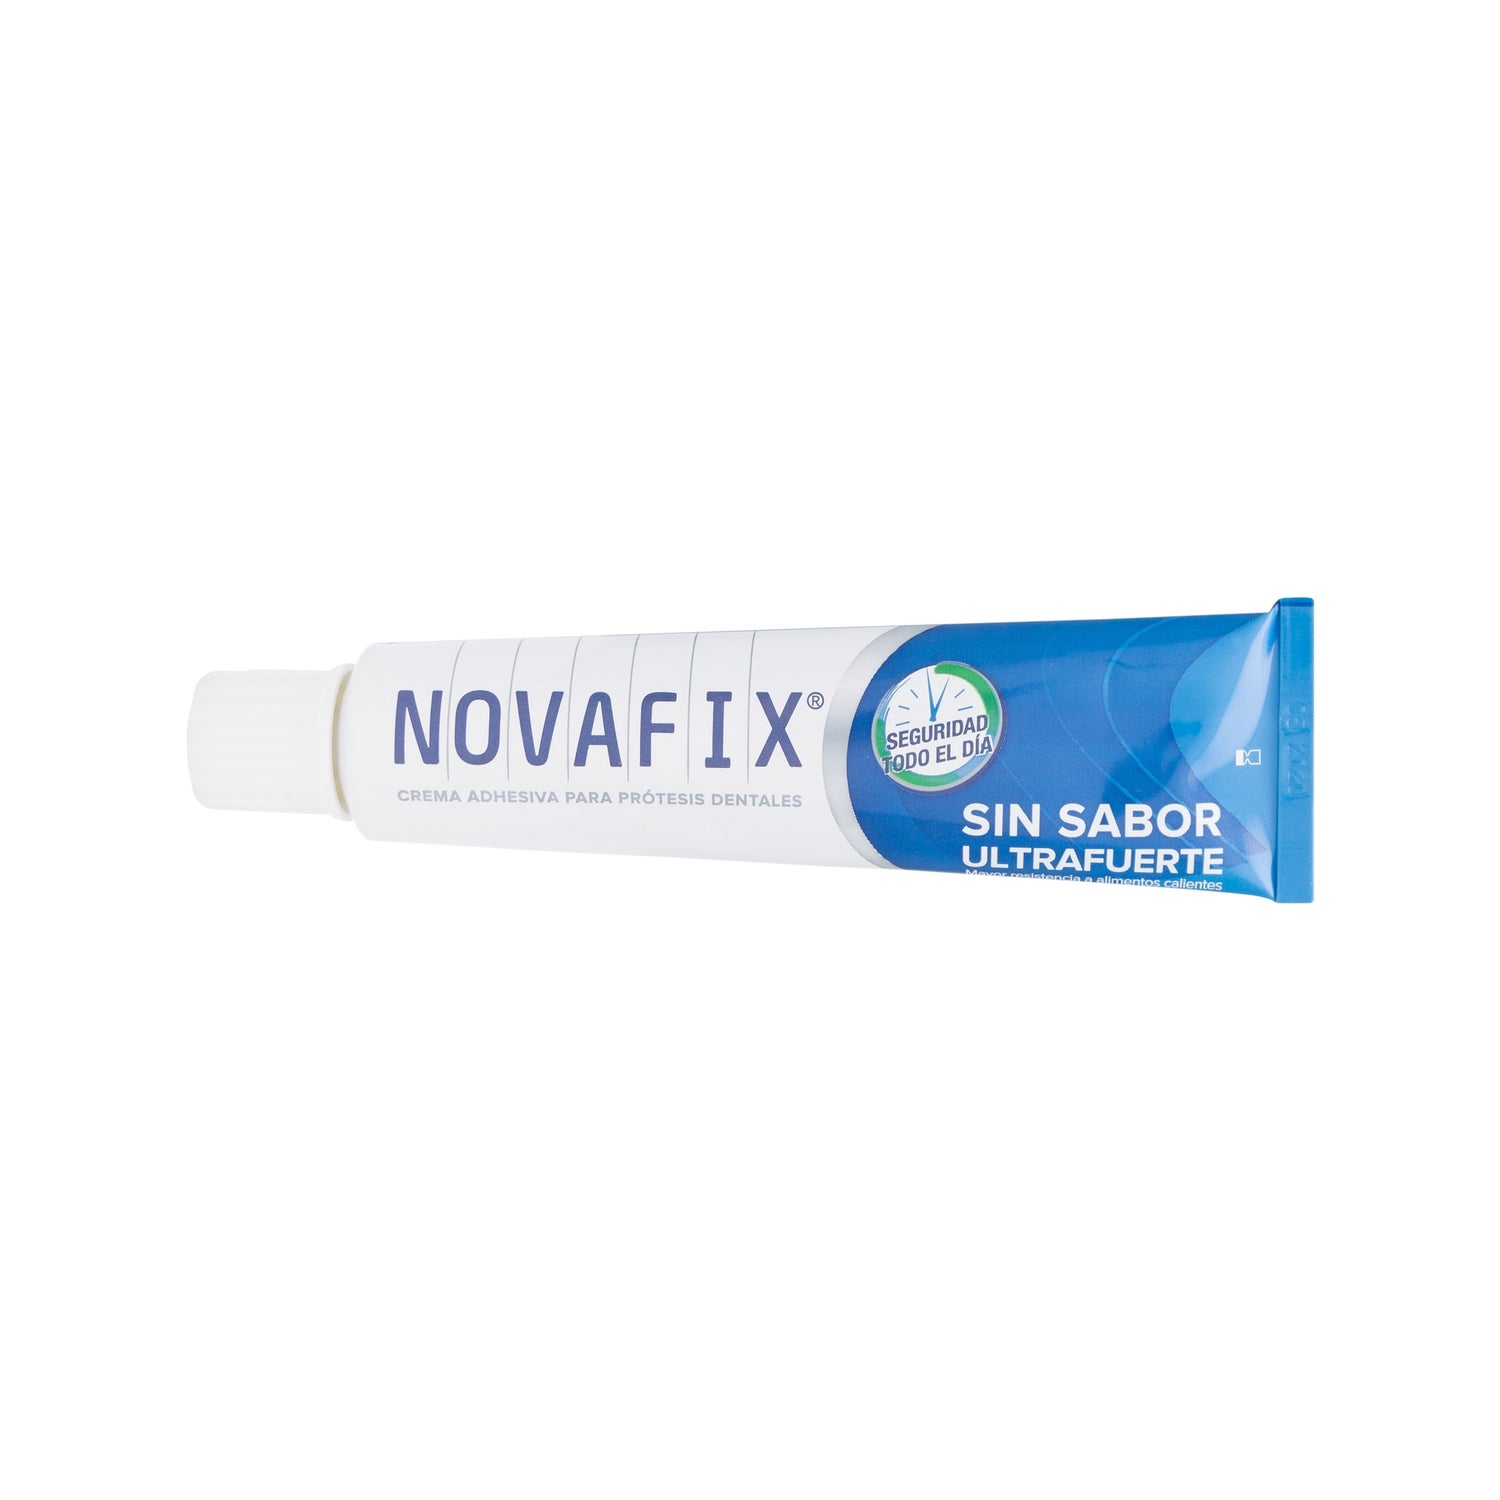 Fixodent Créme Adhesive Prothese Dentaire 70g